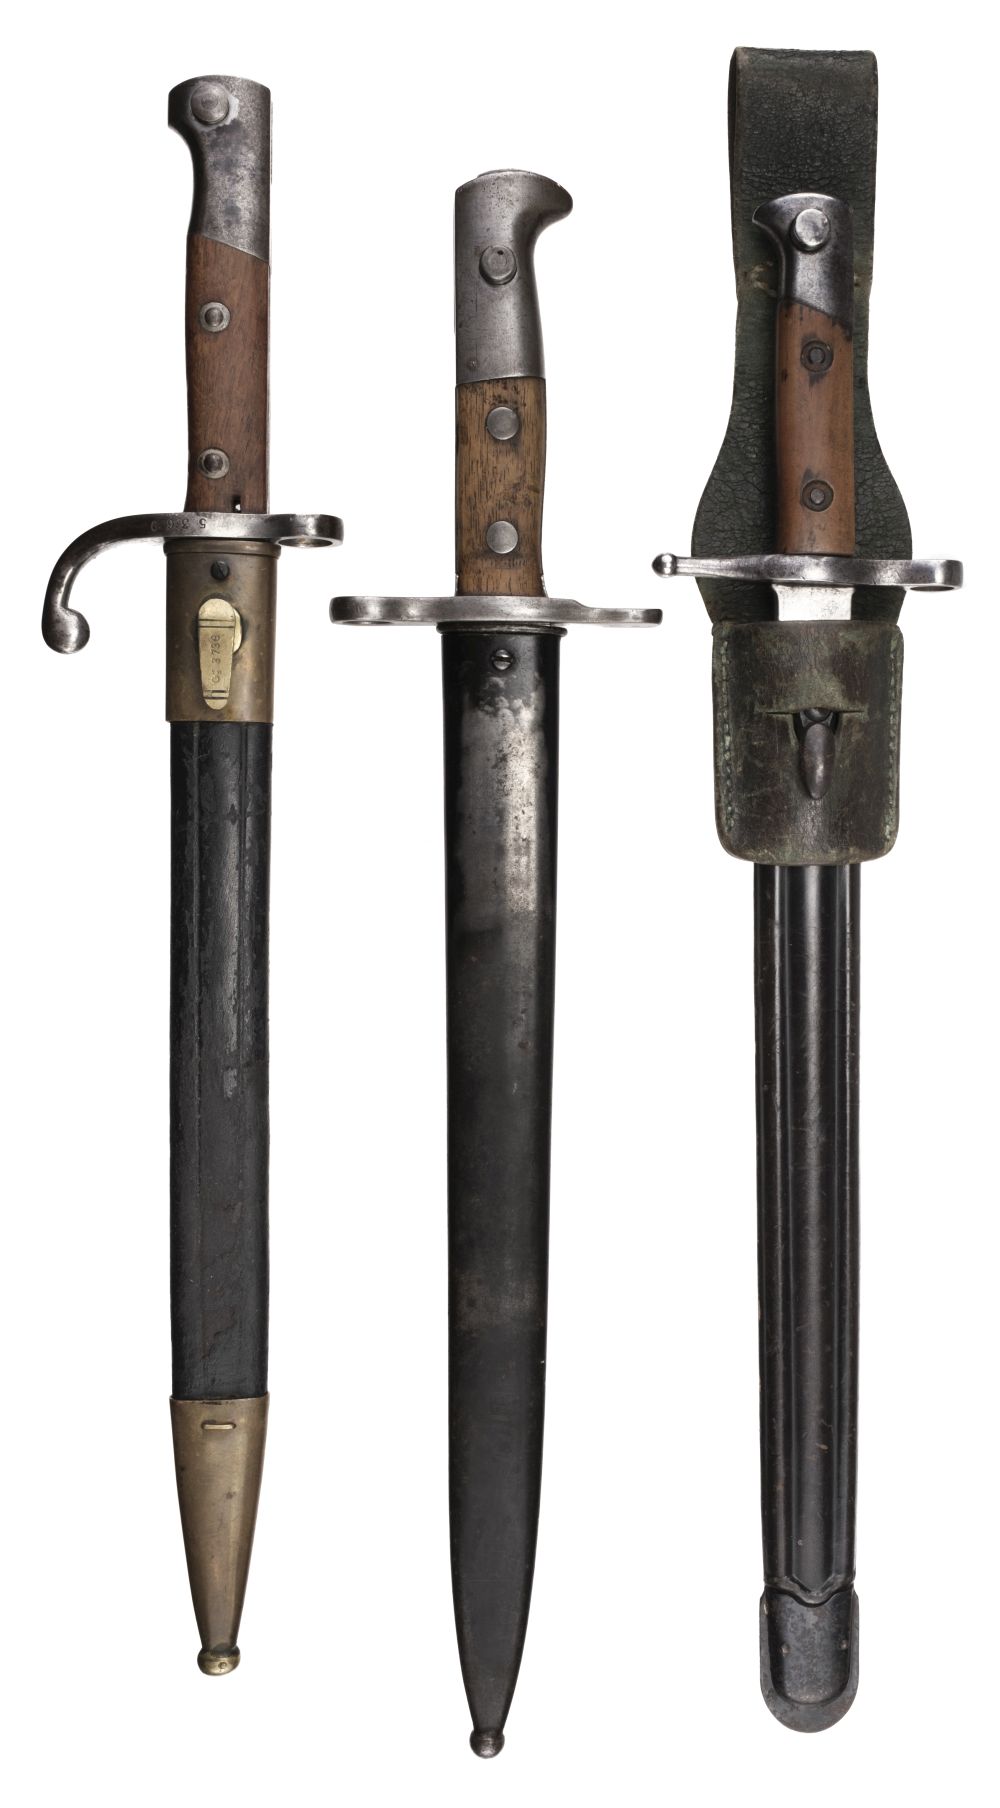 Bayonet. Swiss M1918-55 bayonet and two others